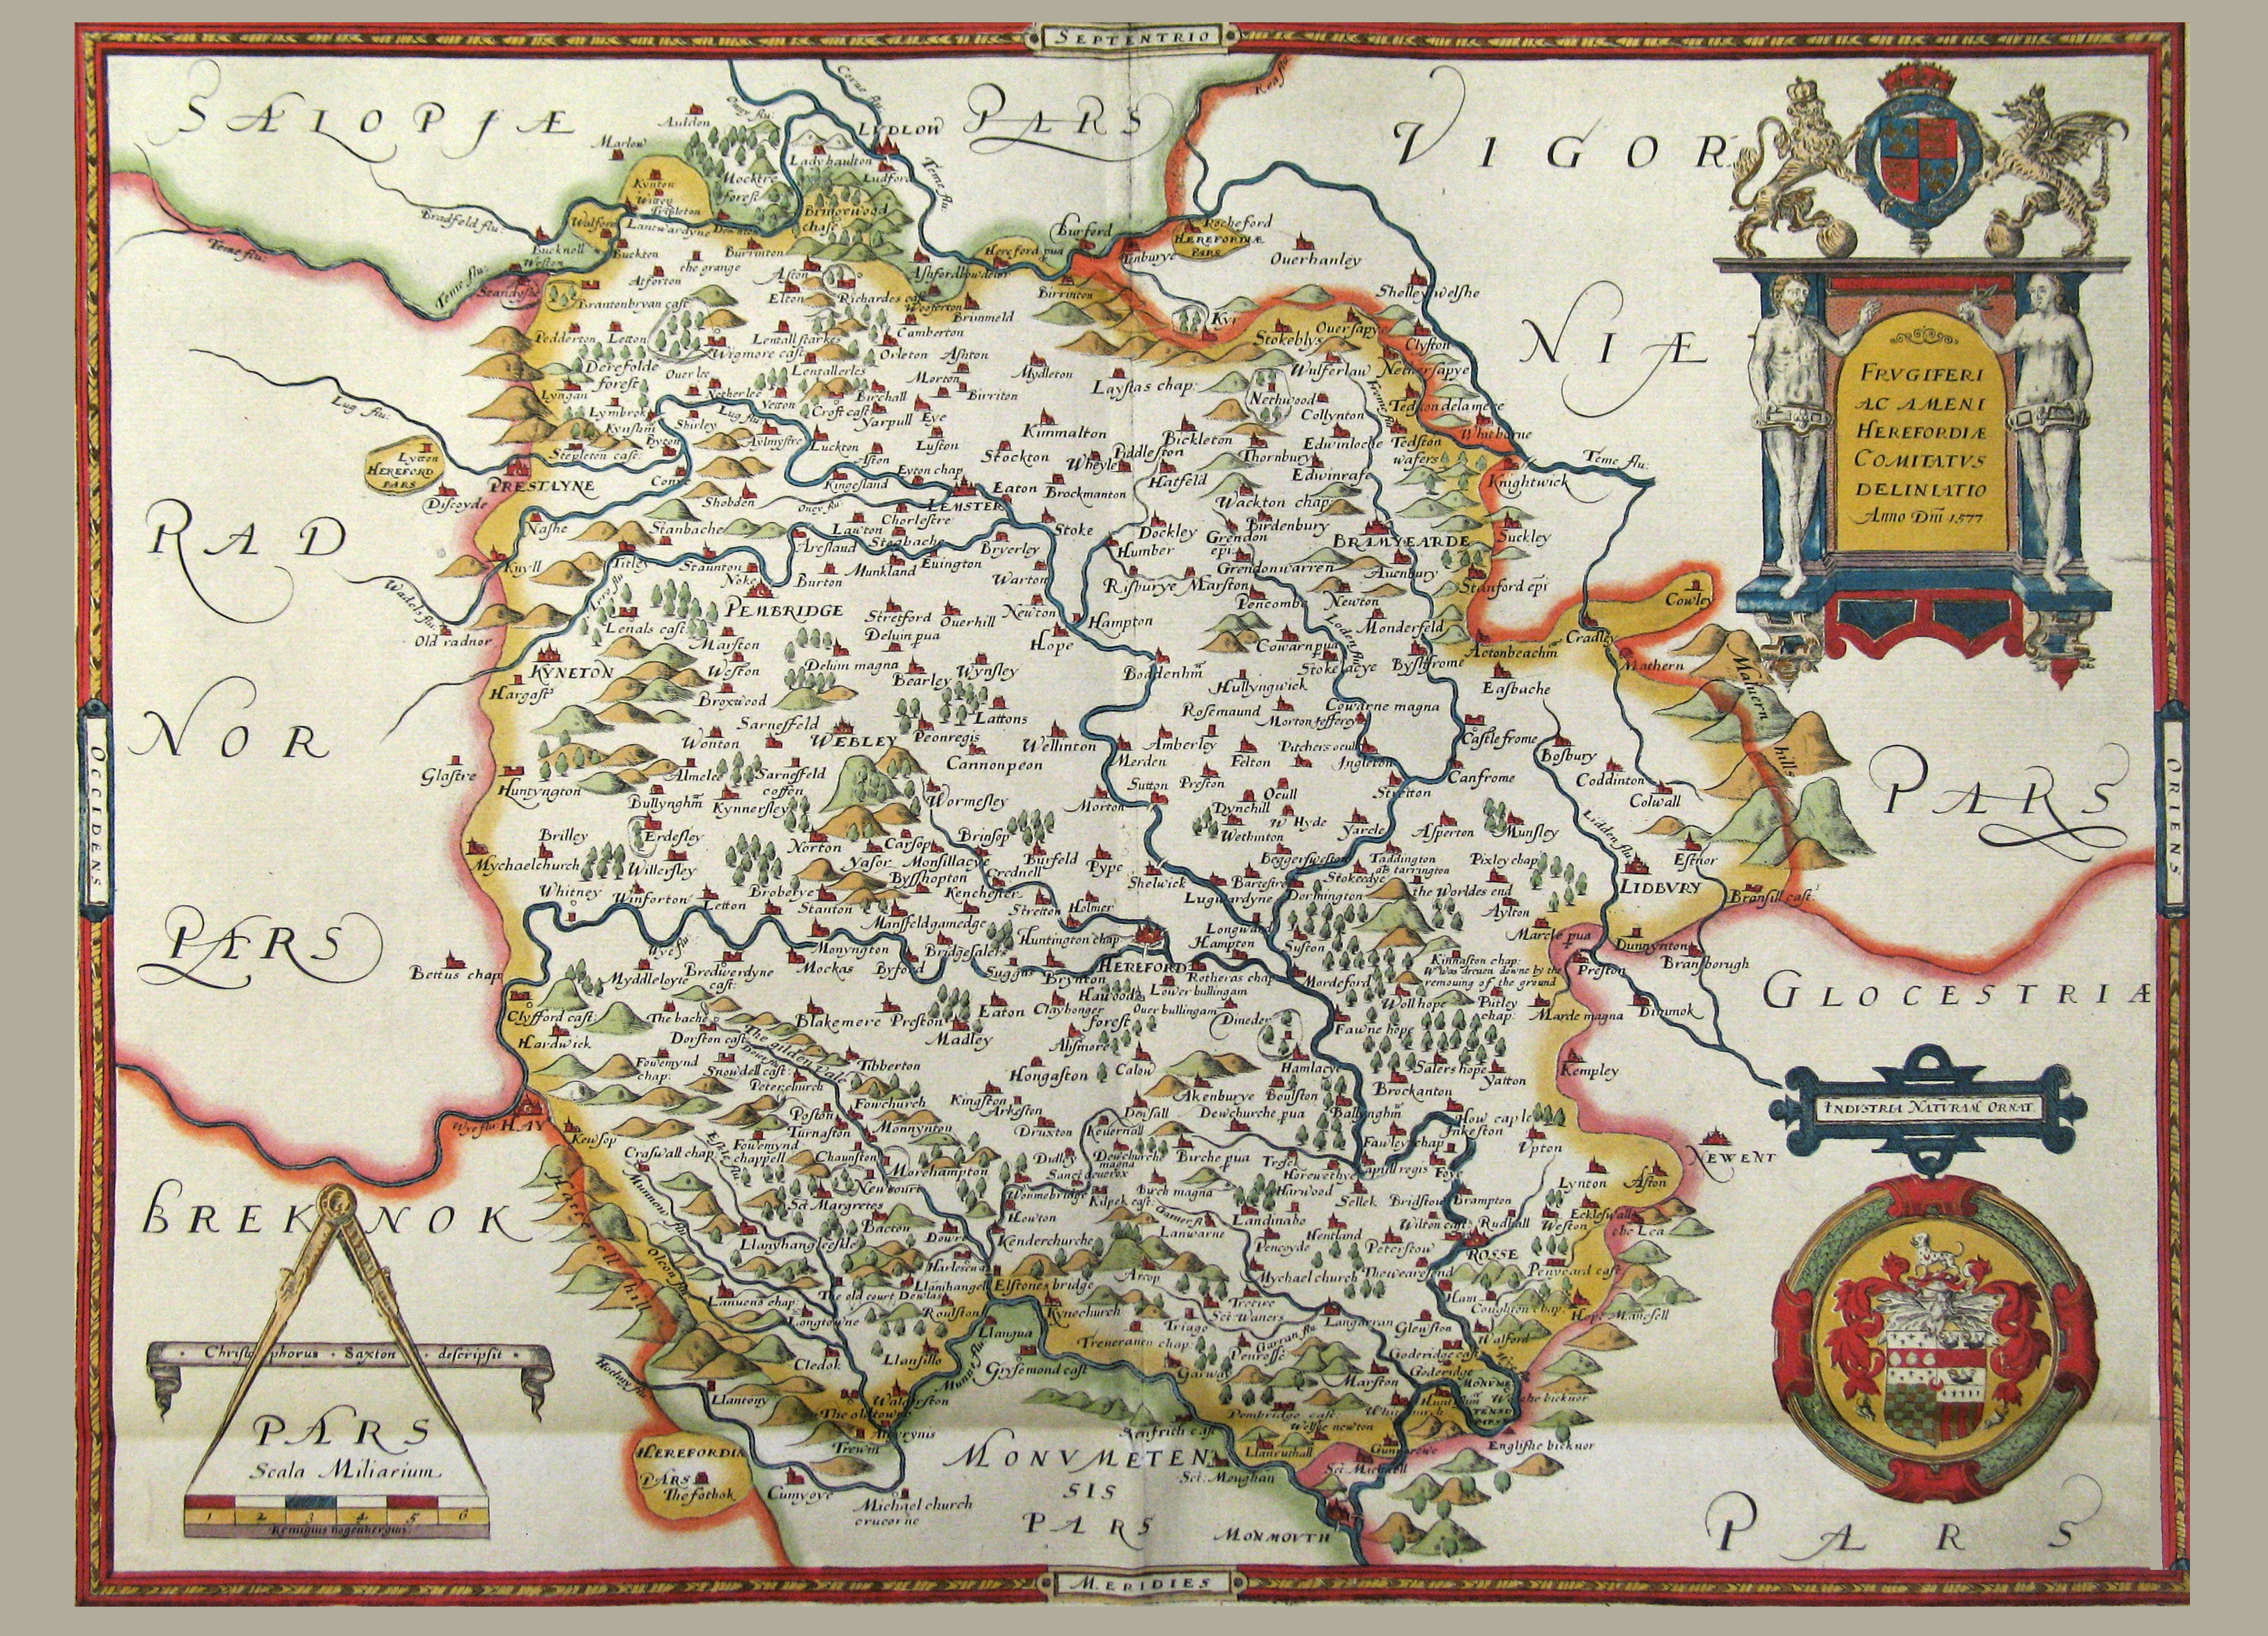 1577 Herefordshire map Christopher Saxton